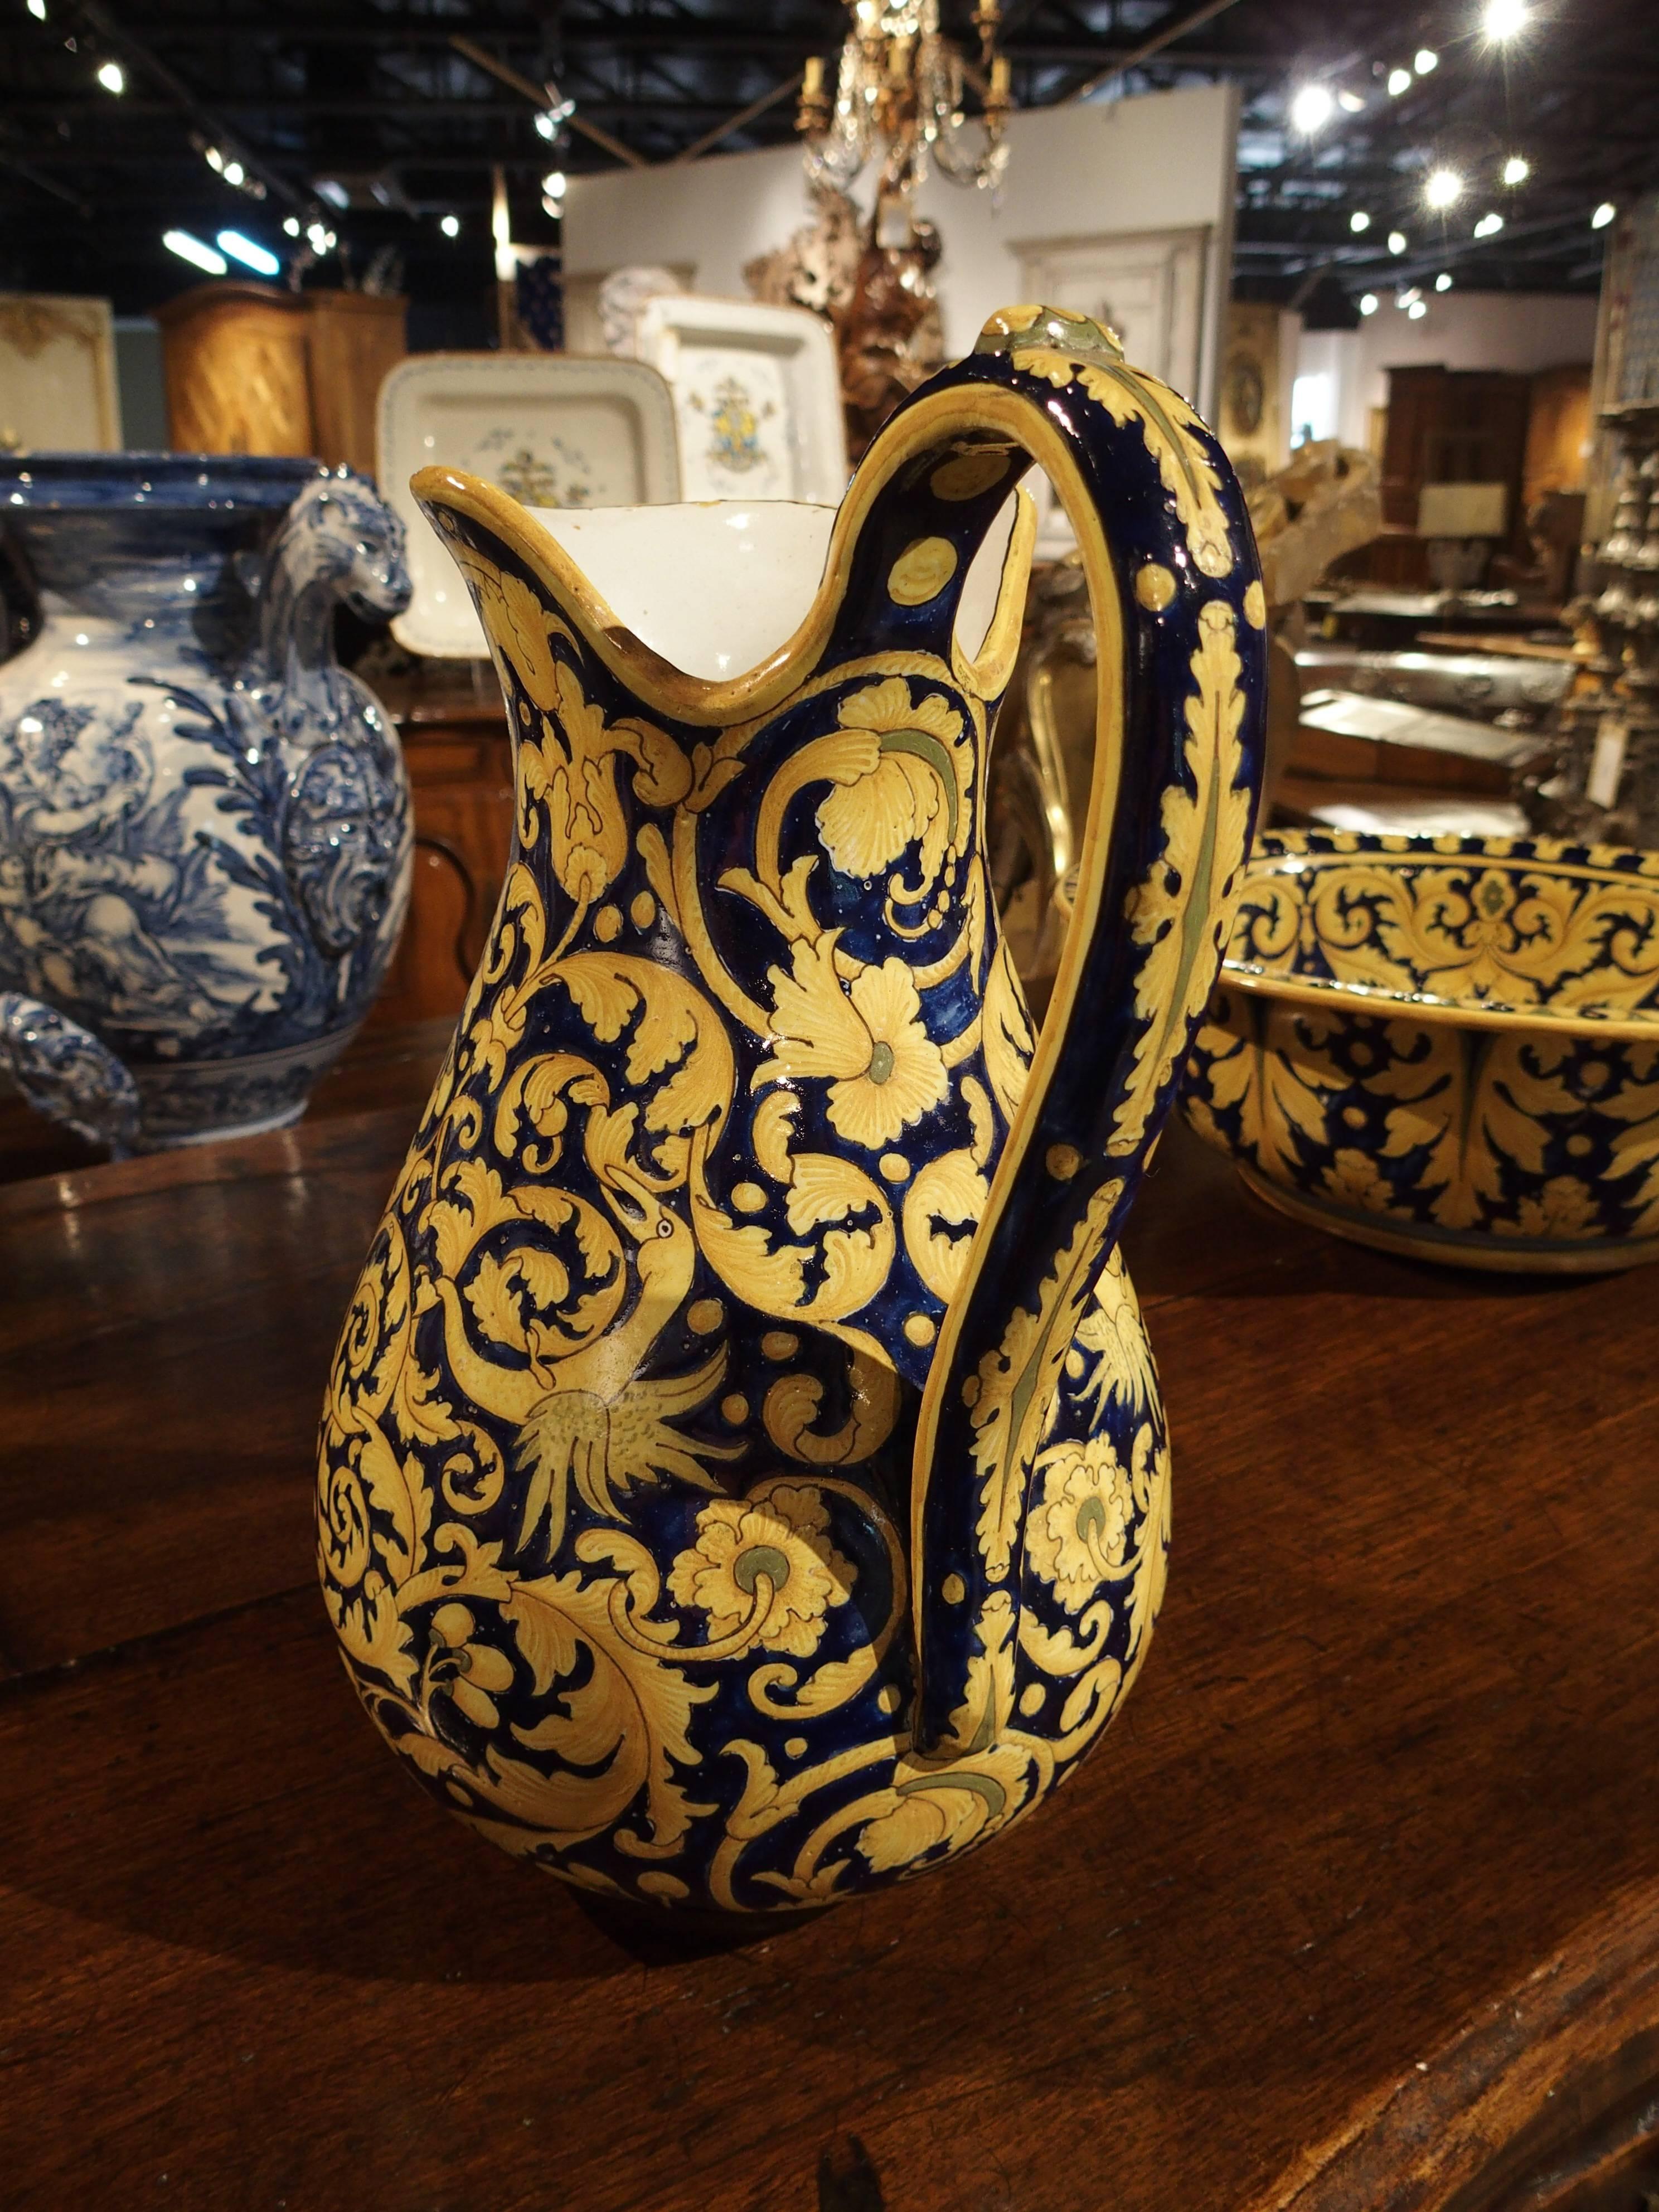 French Antique Nevers Pitcher and Bowl from France, circa 1885